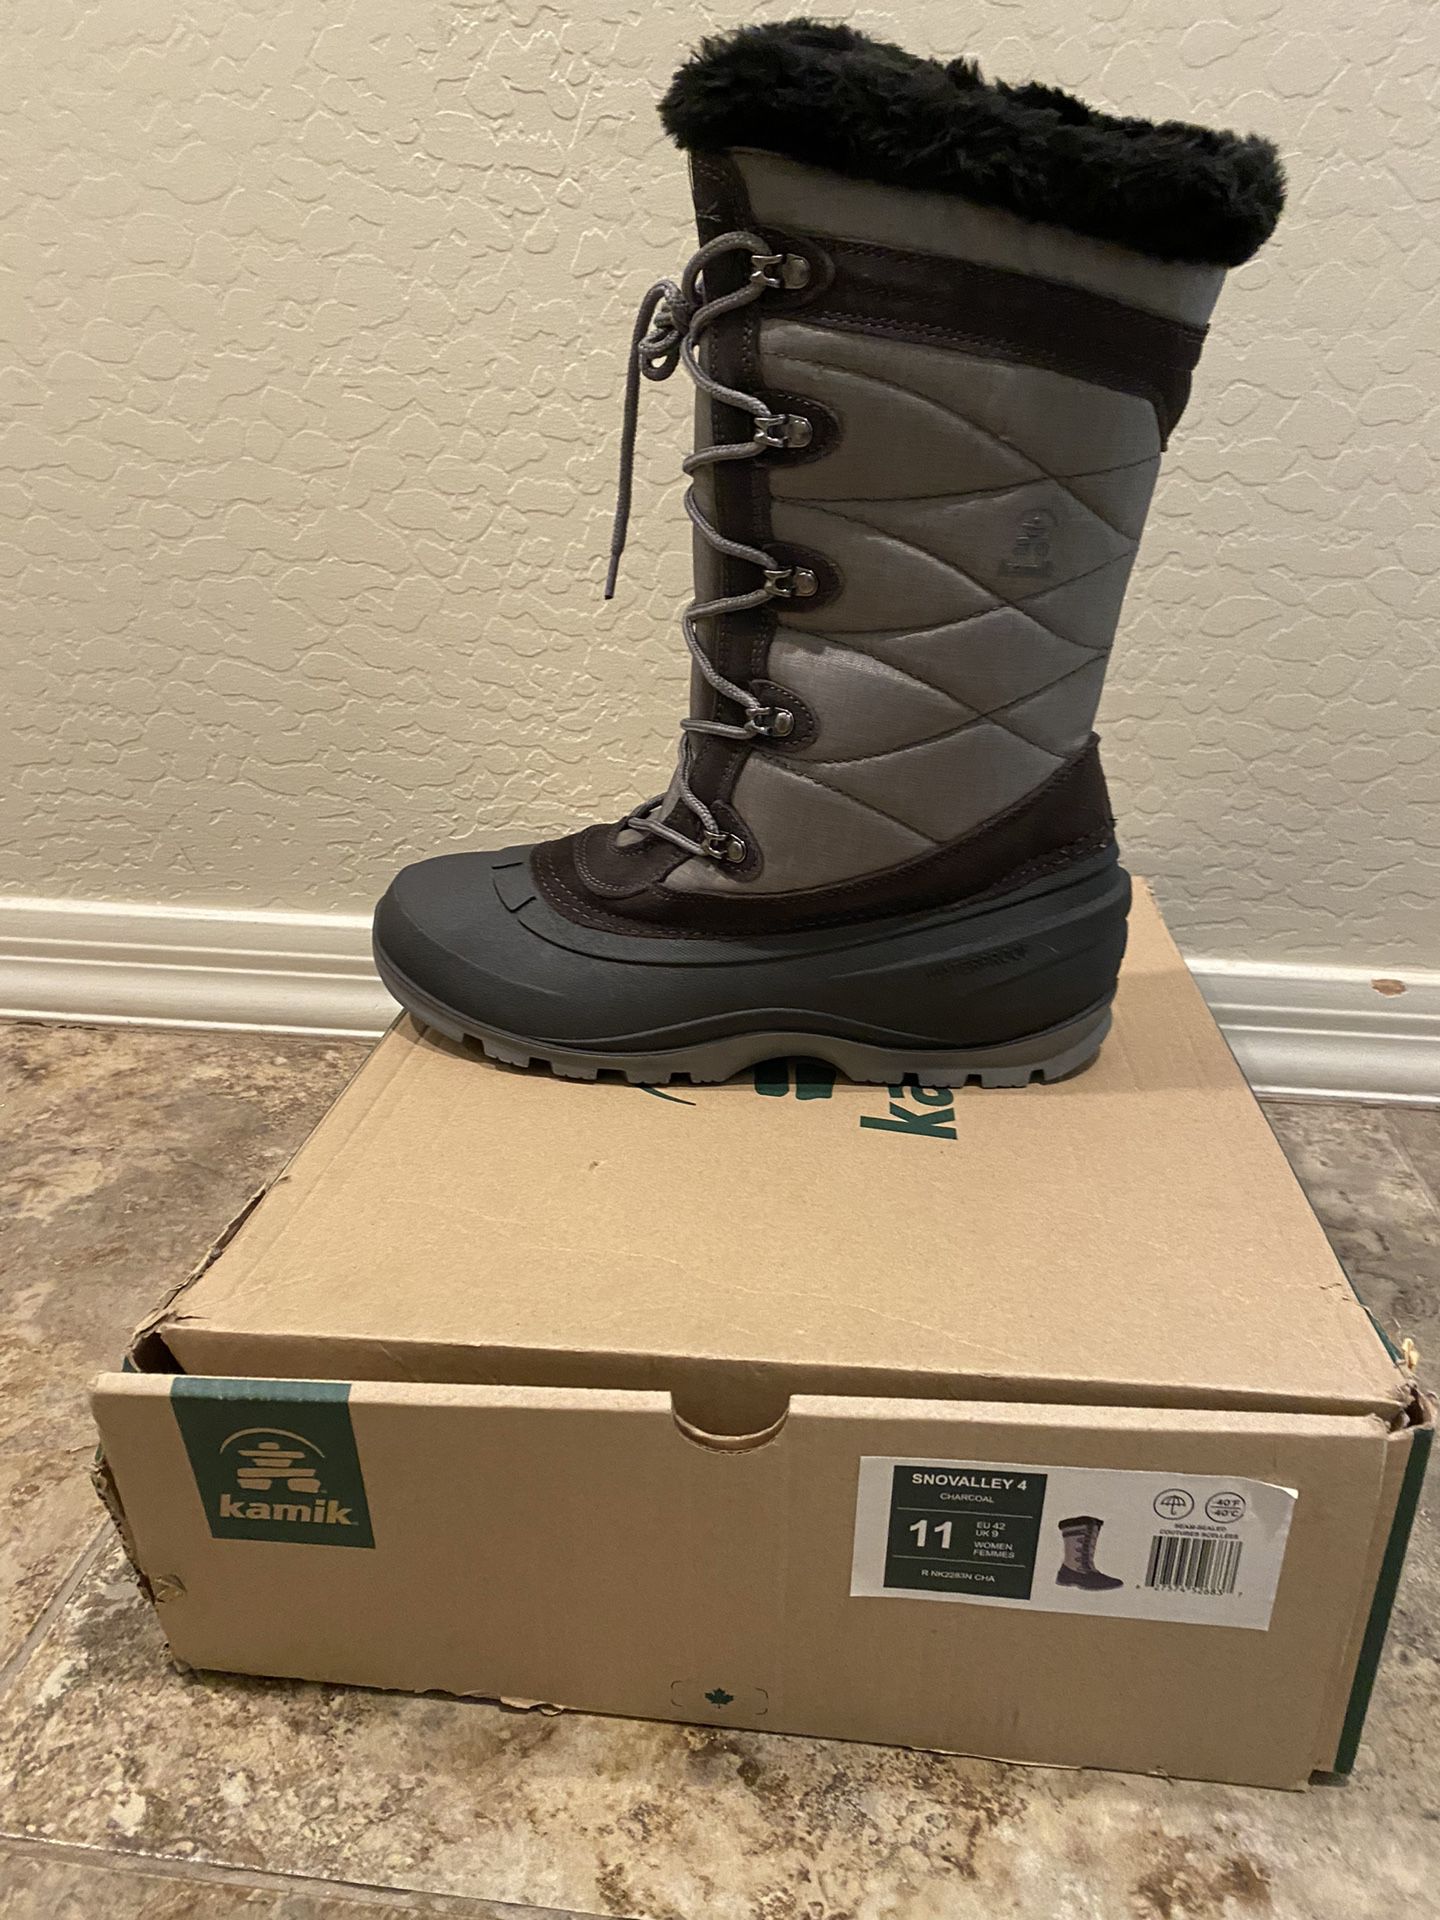 SNOW BOOTS WOMENS SIZES 11